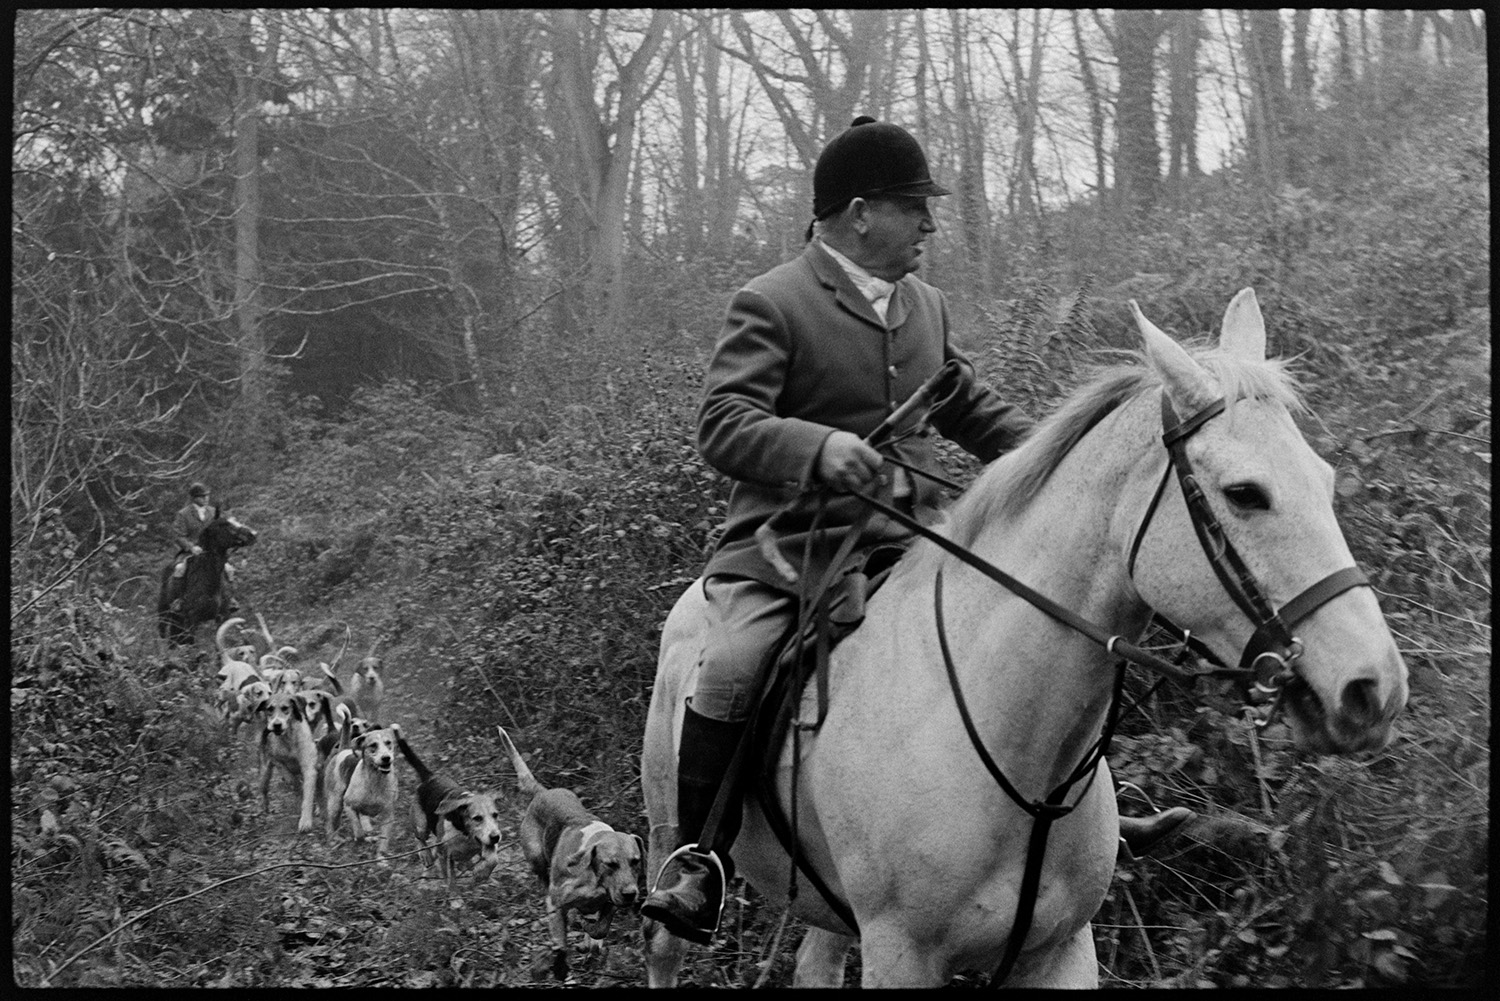 Hunt in wood with hounds.
[Les Grills, in the foreground, and another rider mounted on horses and dressed in hunting clothes, riding on a track through a wood at Halsdon, Dolton. A pack of hounds is between the two riders.]